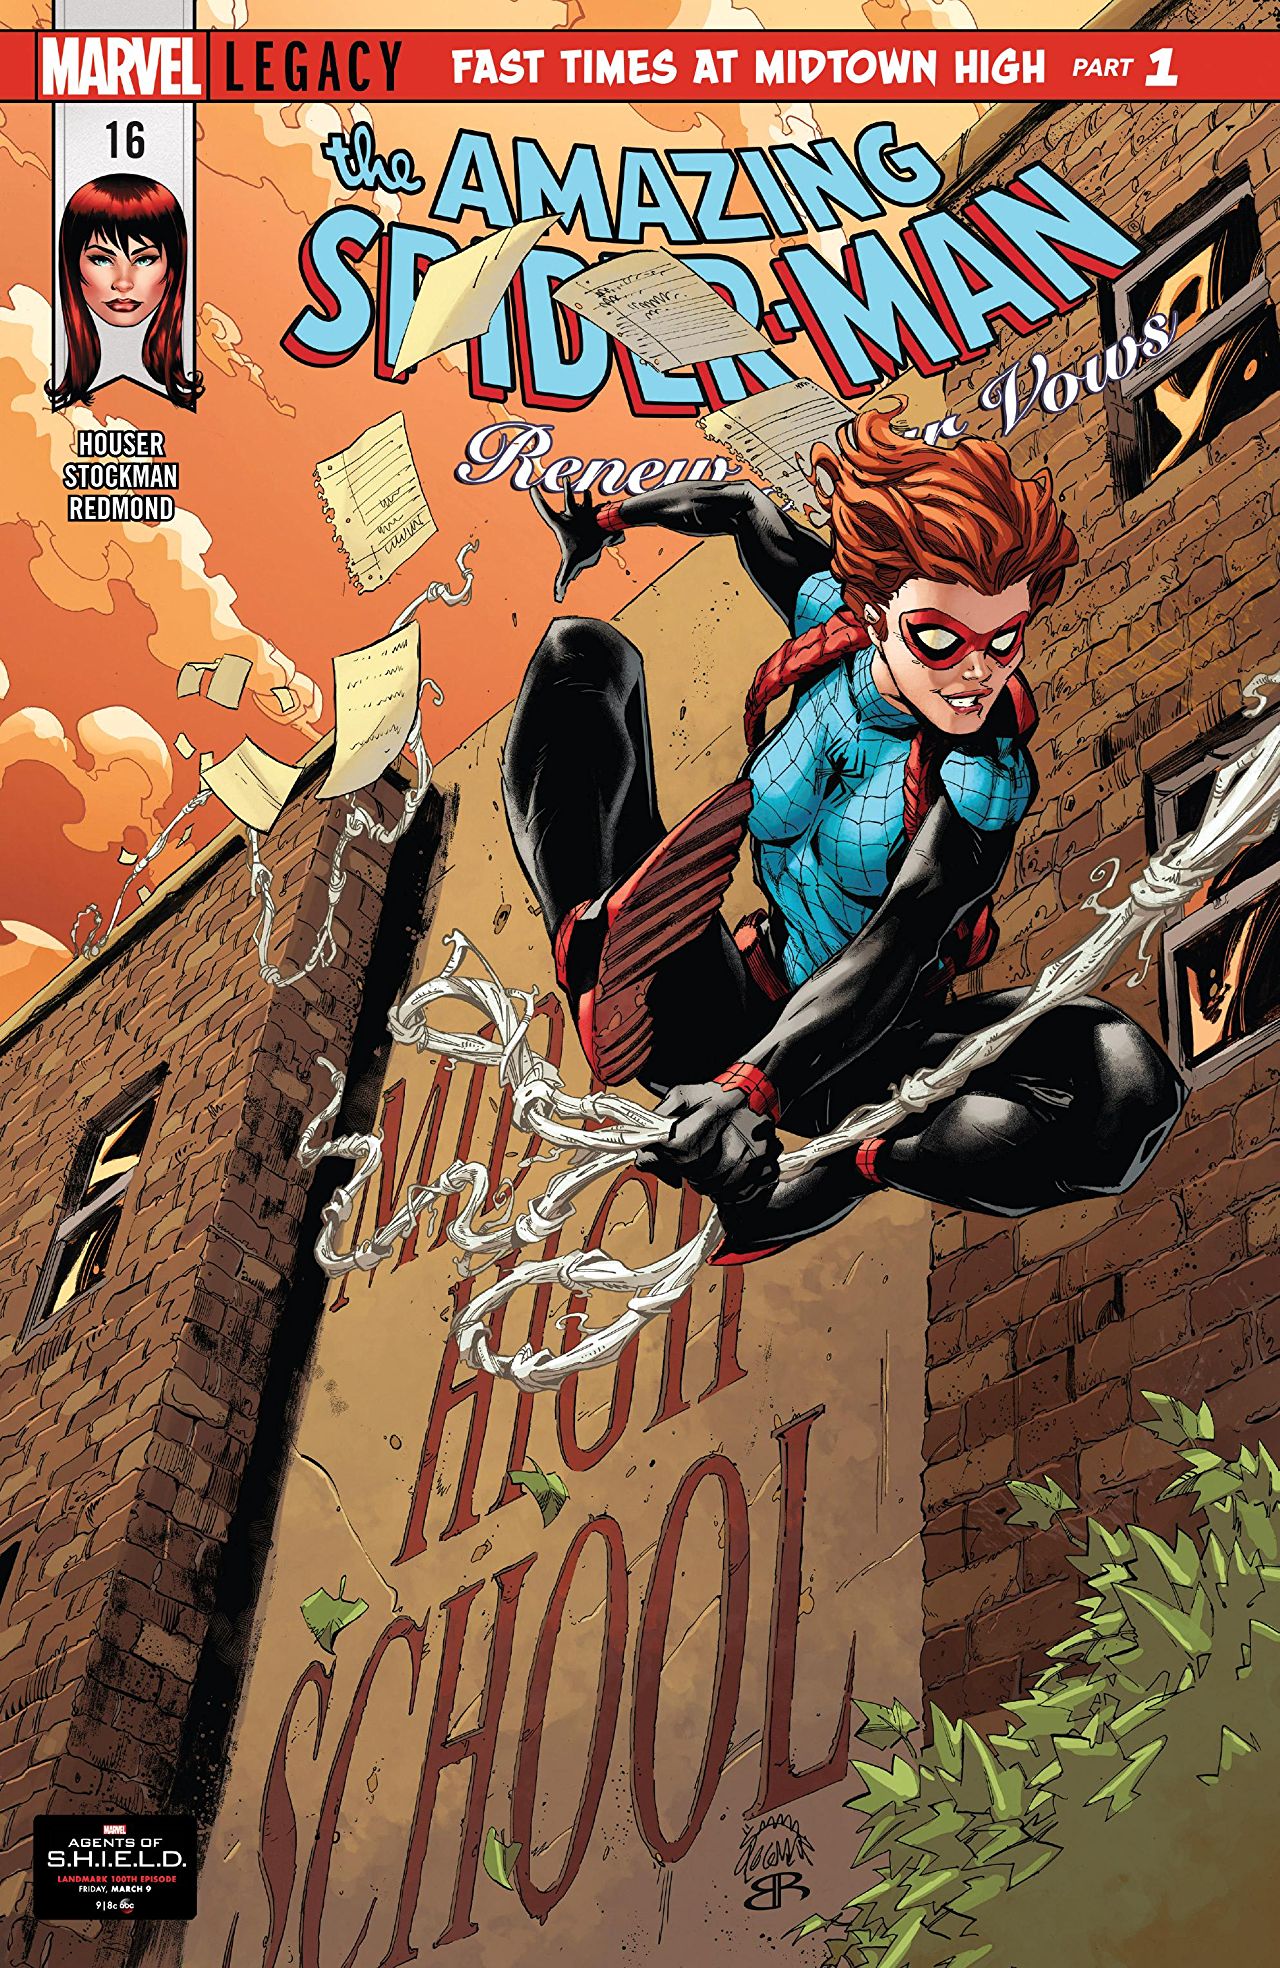 Marvel Preview: Amazing Spider-Man: Renew Your Vows #16